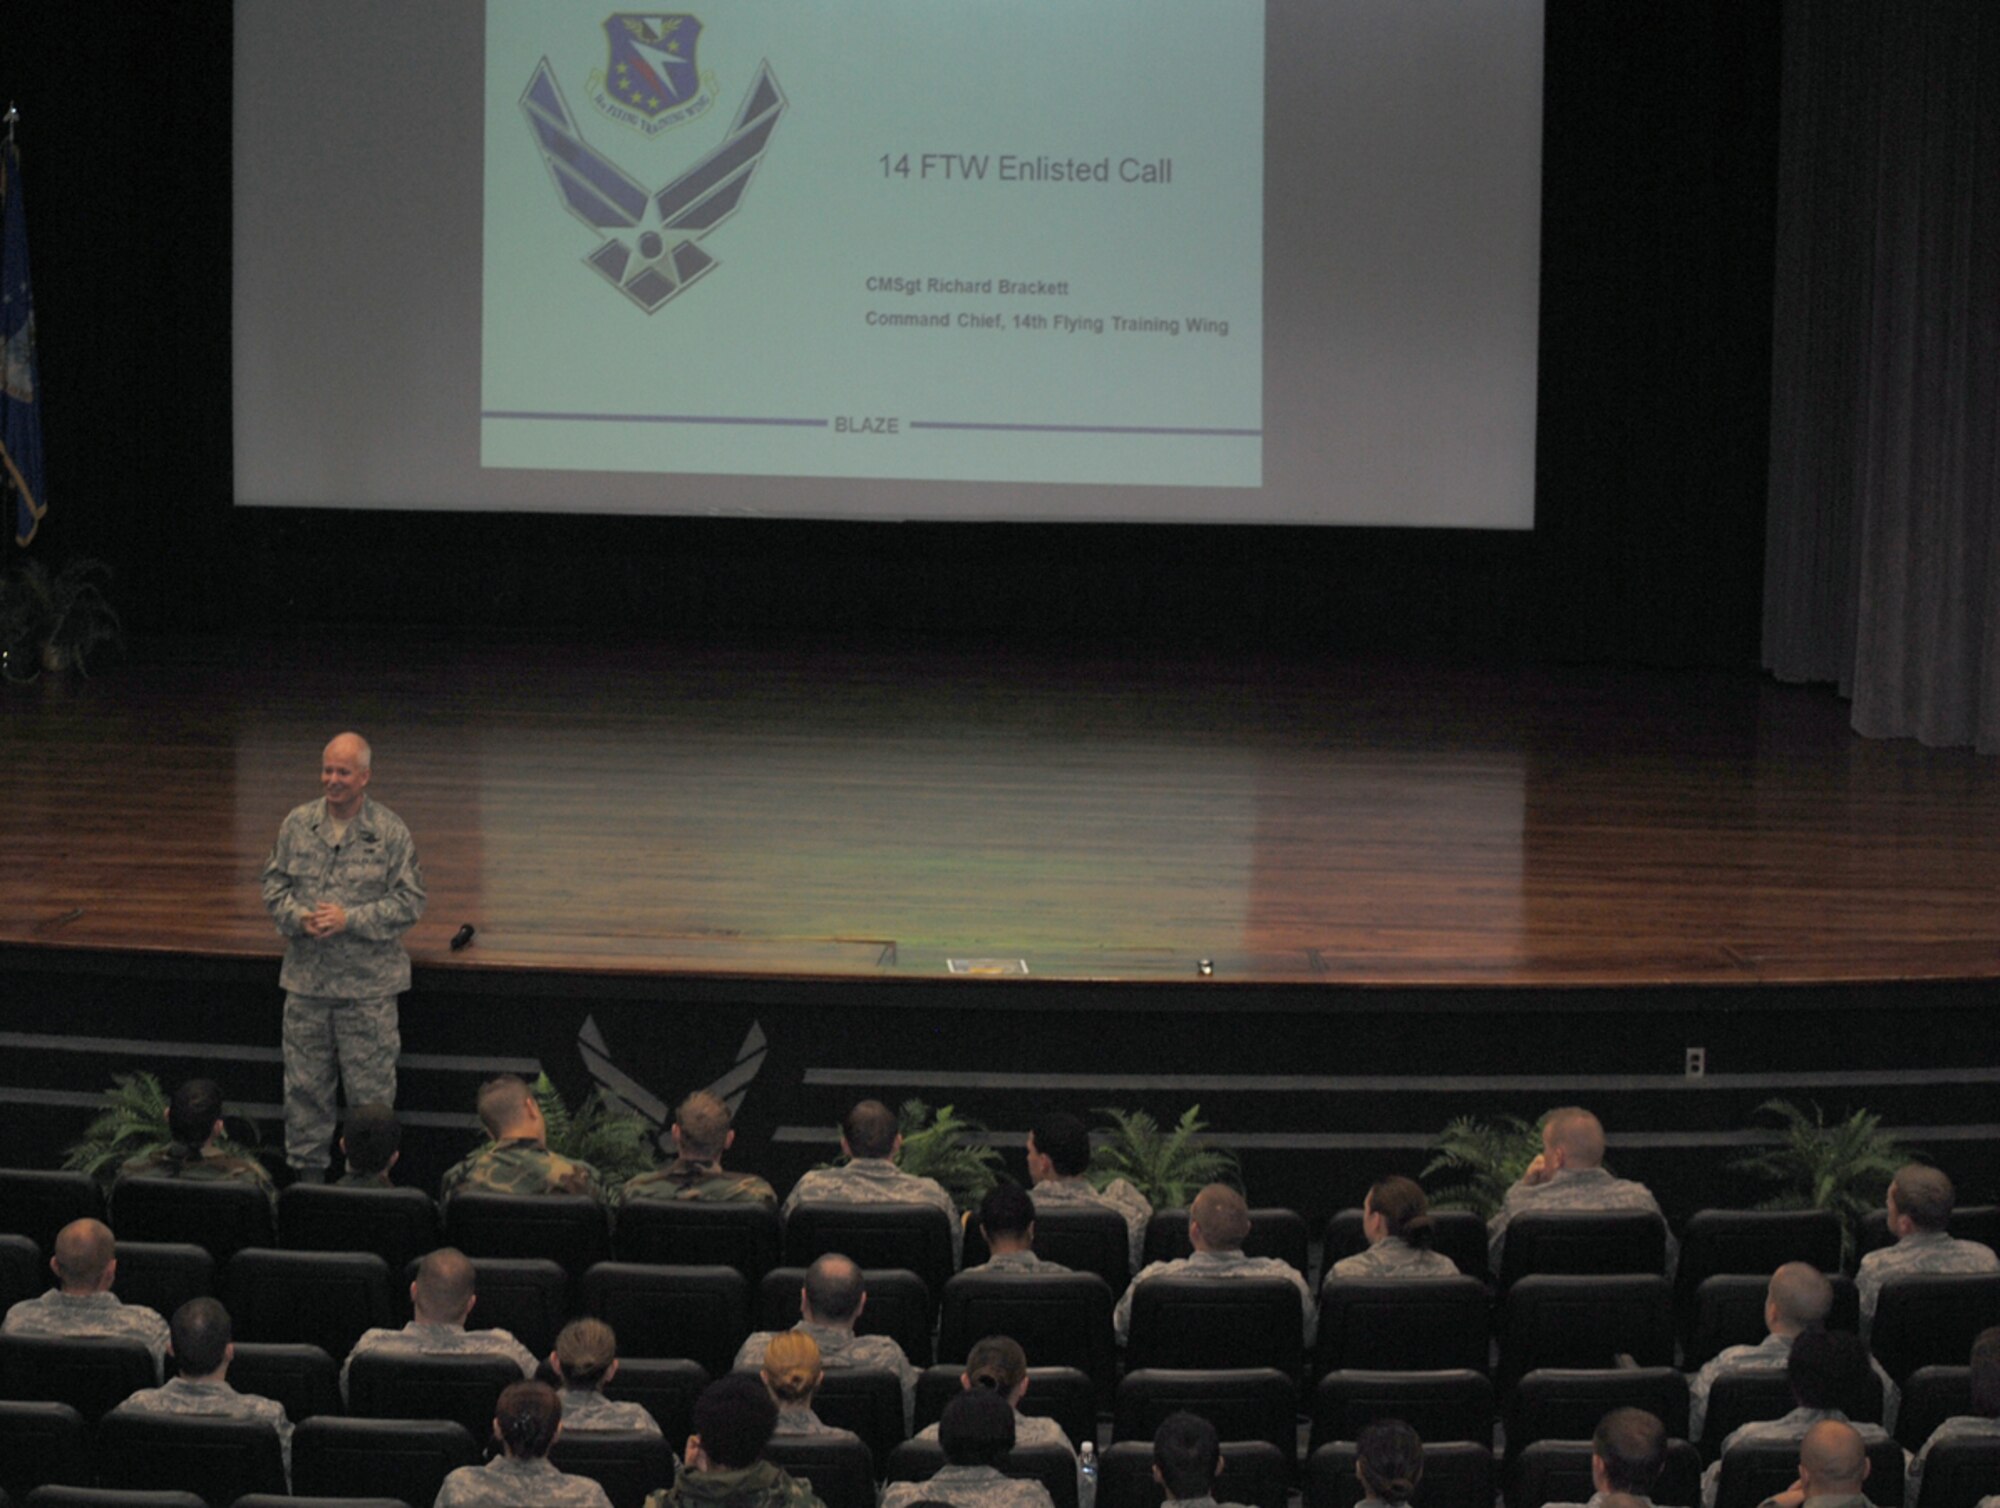 Command Chief Master Sgt. Richard Brackett, 14th Flying Training Wing, speaks at an NCO call Nov. 12 at the Kaye Auditorium. Chief Brackett held a call for Airmen, NCOs and SNCOs with topics covering enlisted performance reports and professional military education, among others. (U.S. Air Force photo/Senior Airman Jacob Corbin). 